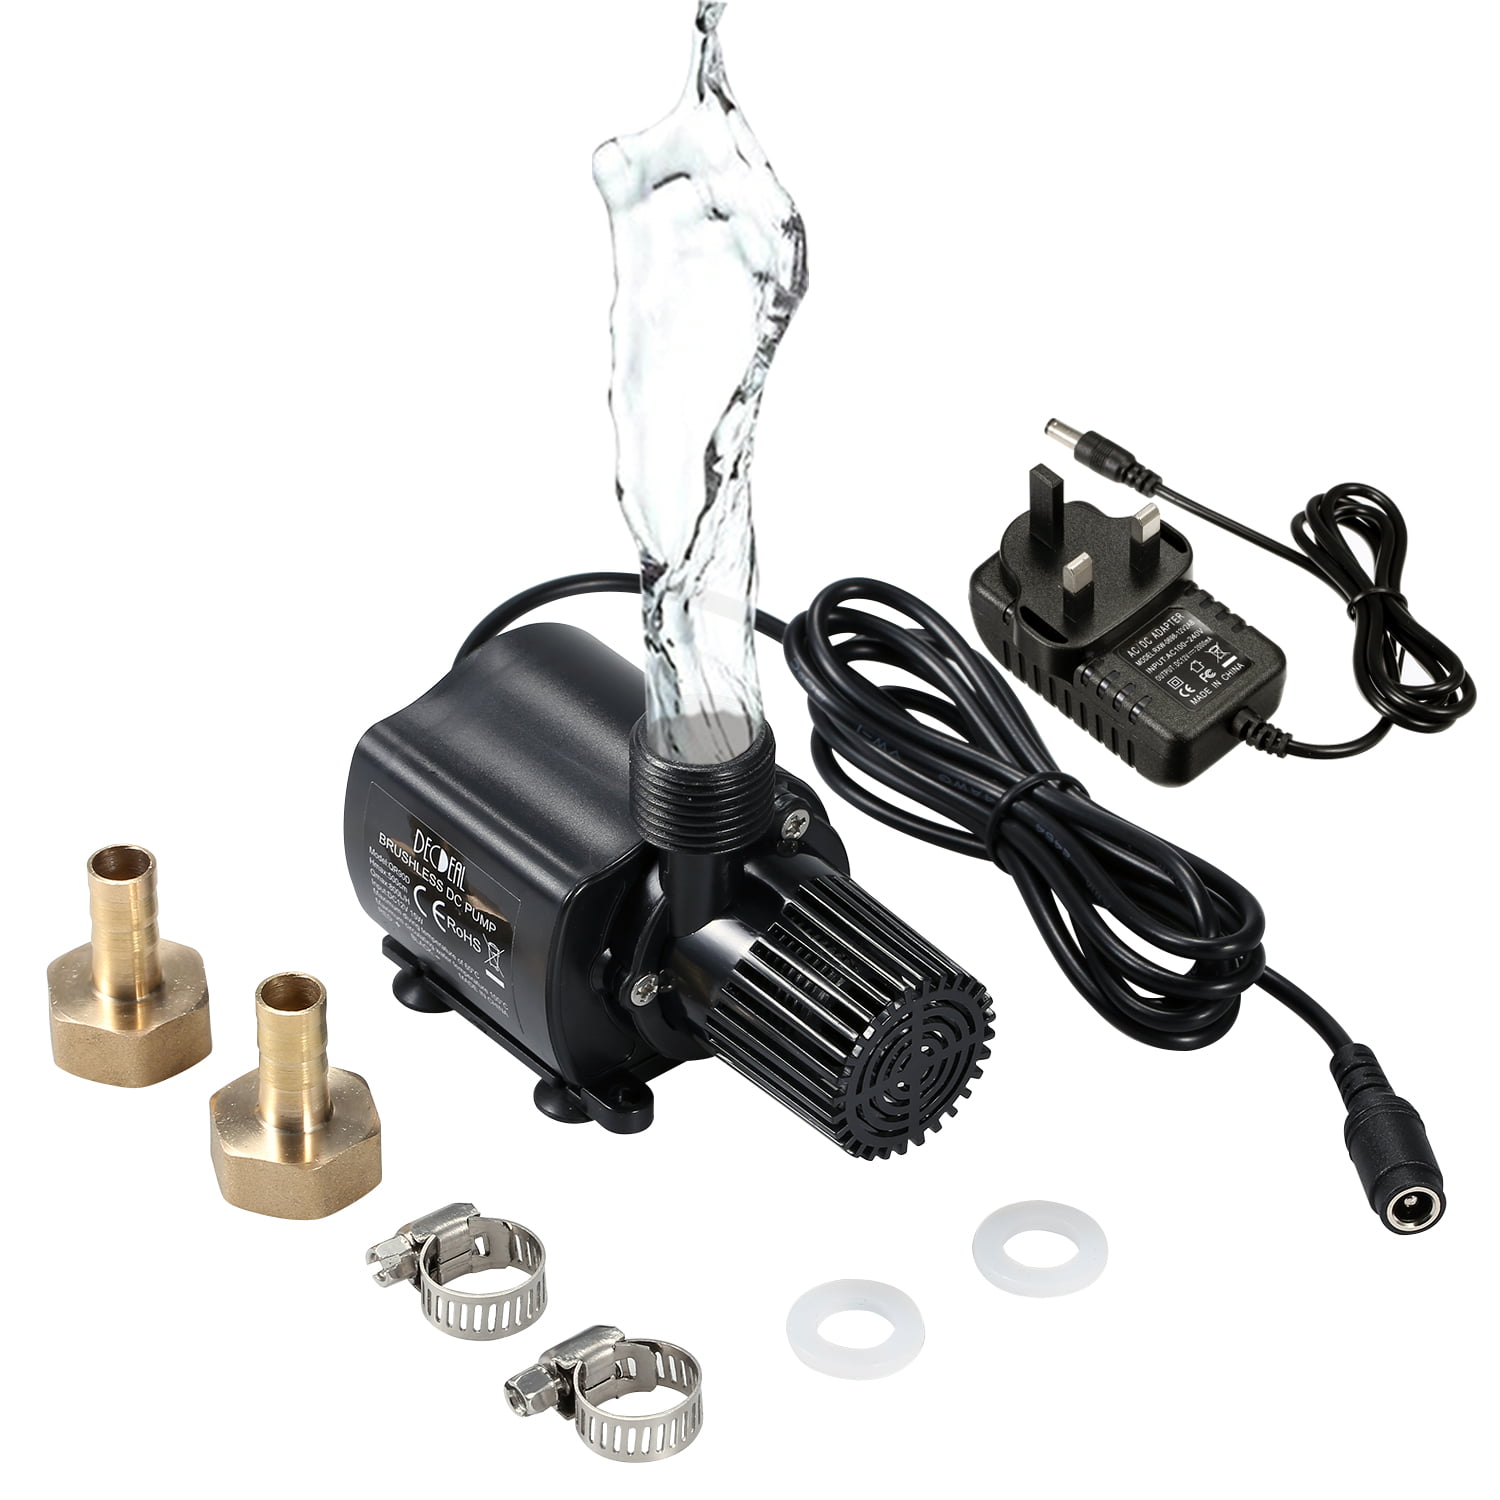 Details about  / US Submersible Water Pump For Aquarium Fish Tank Water Feature Optional LED